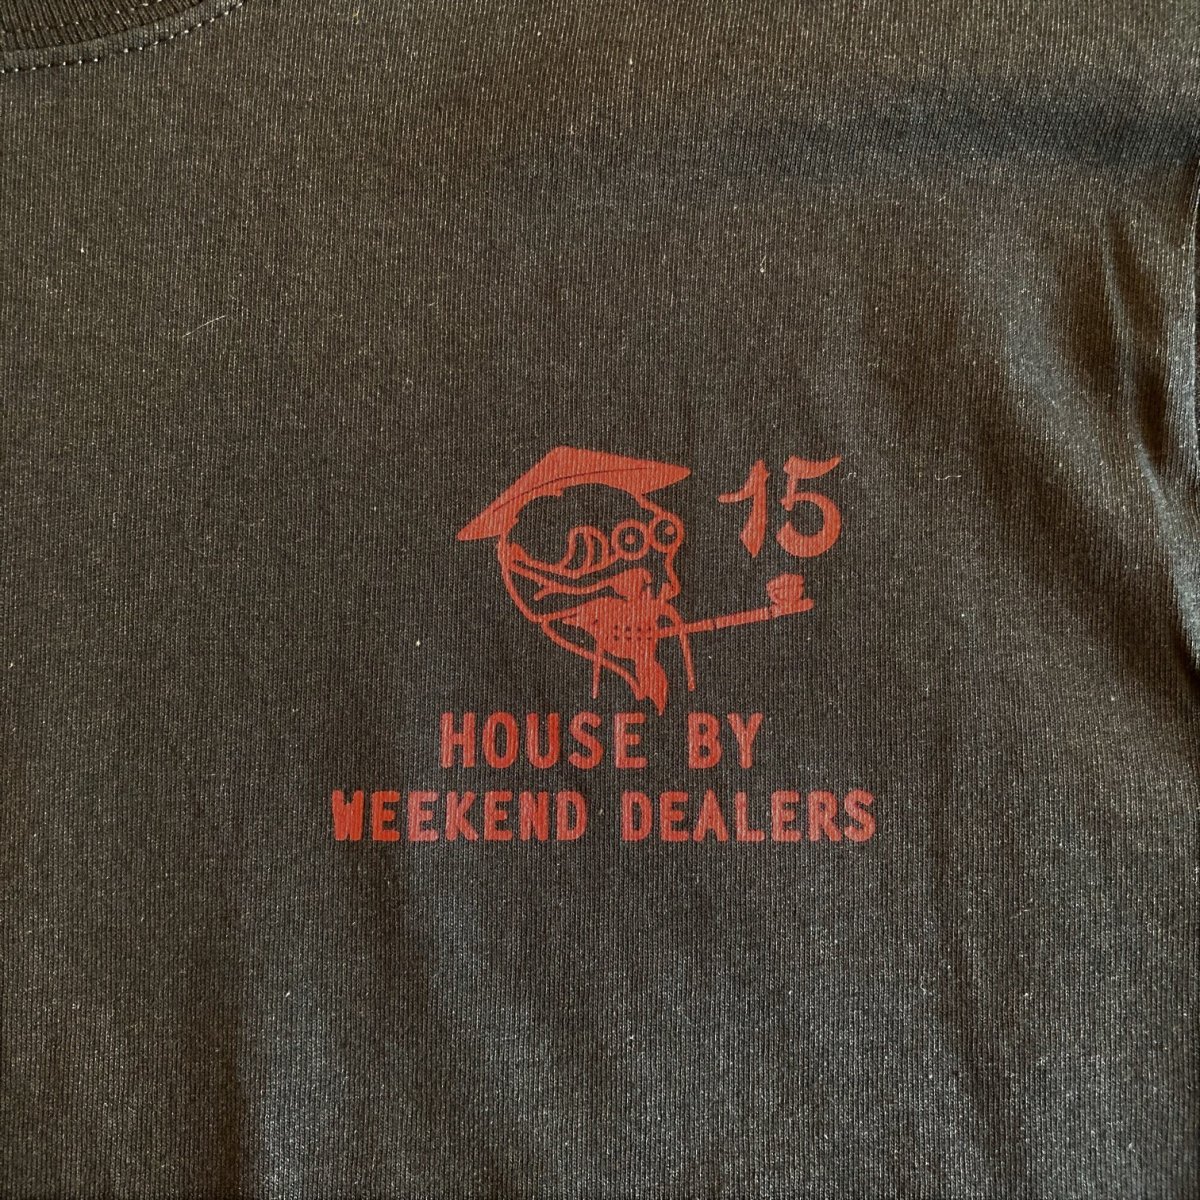 <img class='new_mark_img1' src='https://img.shop-pro.jp/img/new/icons3.gif' style='border:none;display:inline;margin:0px;padding:0px;width:auto;' />Black Weirdos × HOUSE by WEEKEND DEALERS 15th ANNIVERSARY LS Tee 【BLACK】 